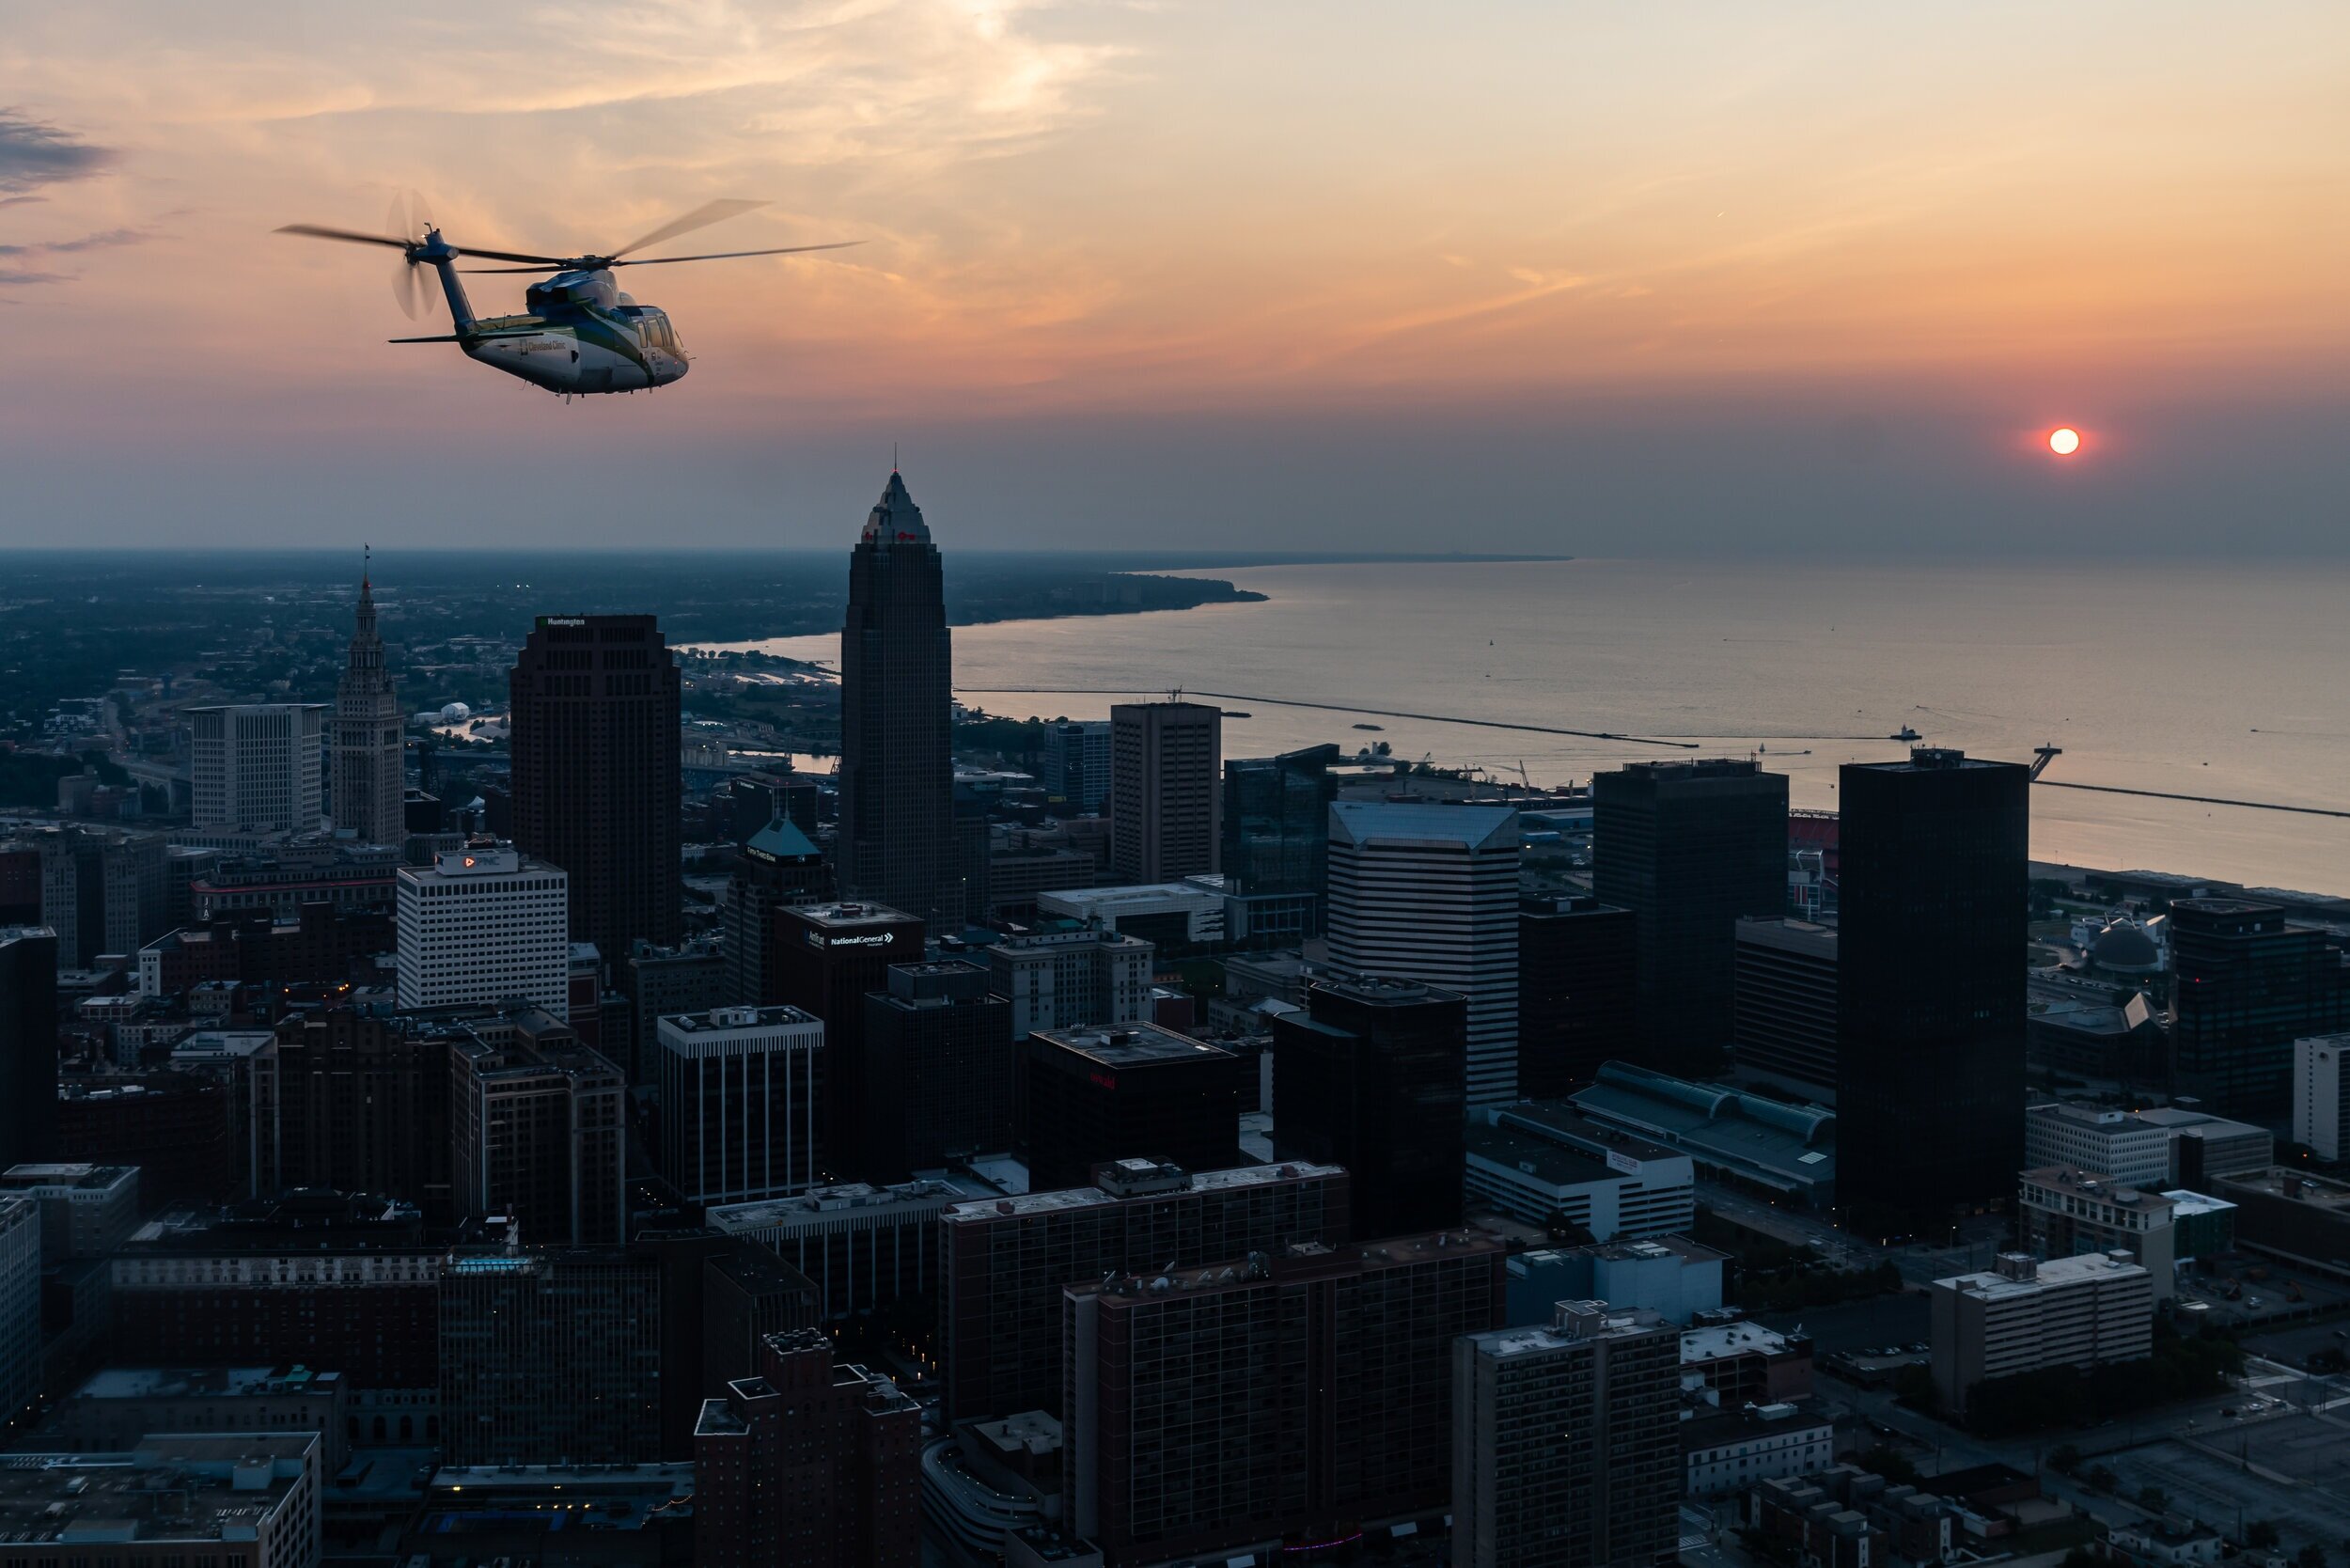 Cleveland Clinic Sikorsky, at Sunset